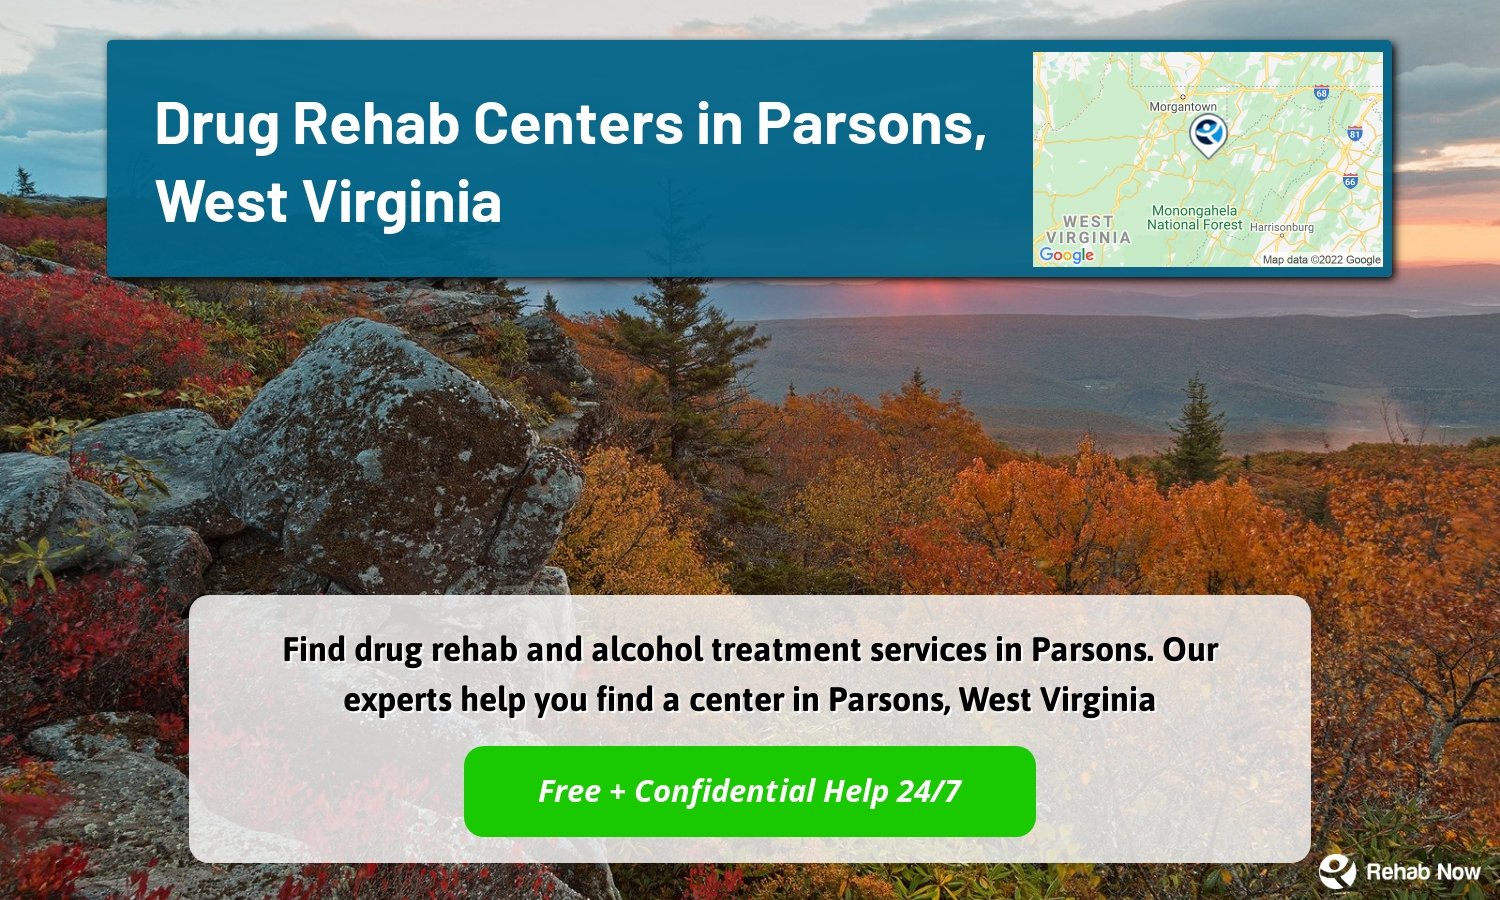 Find drug rehab and alcohol treatment services in Parsons. Our experts help you find a center in Parsons, West Virginia